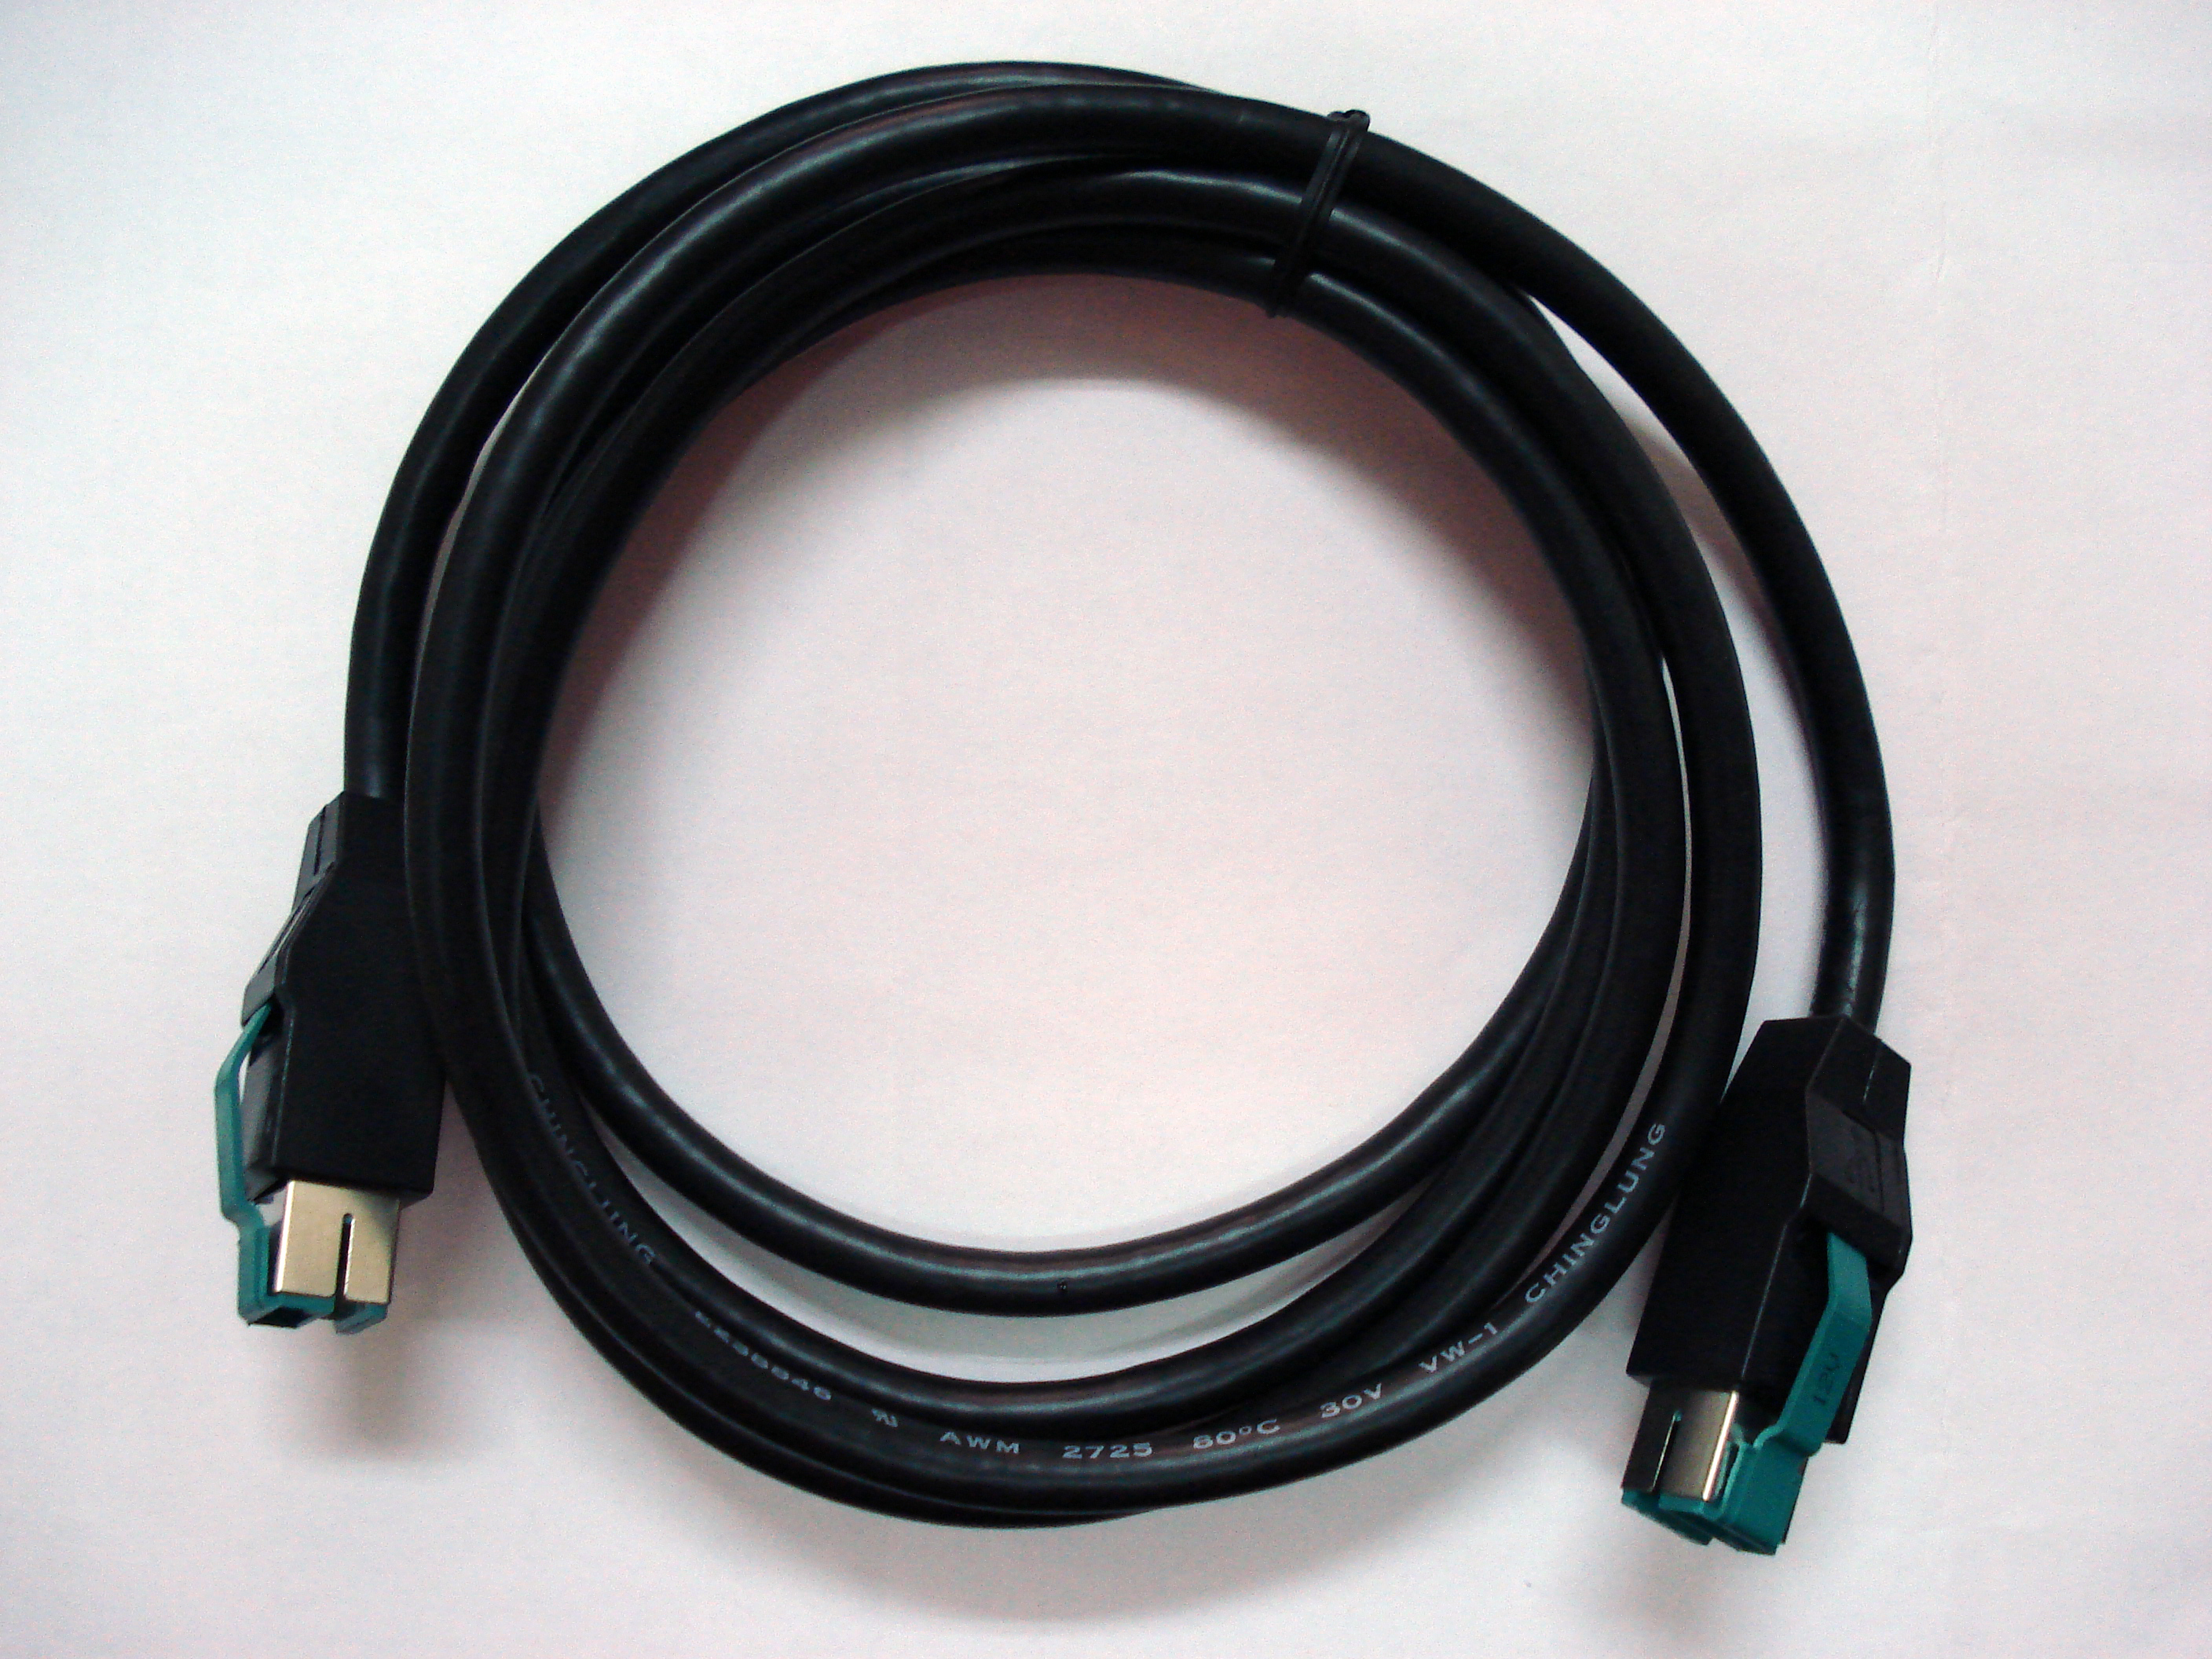 USB Power Cable - USB cables